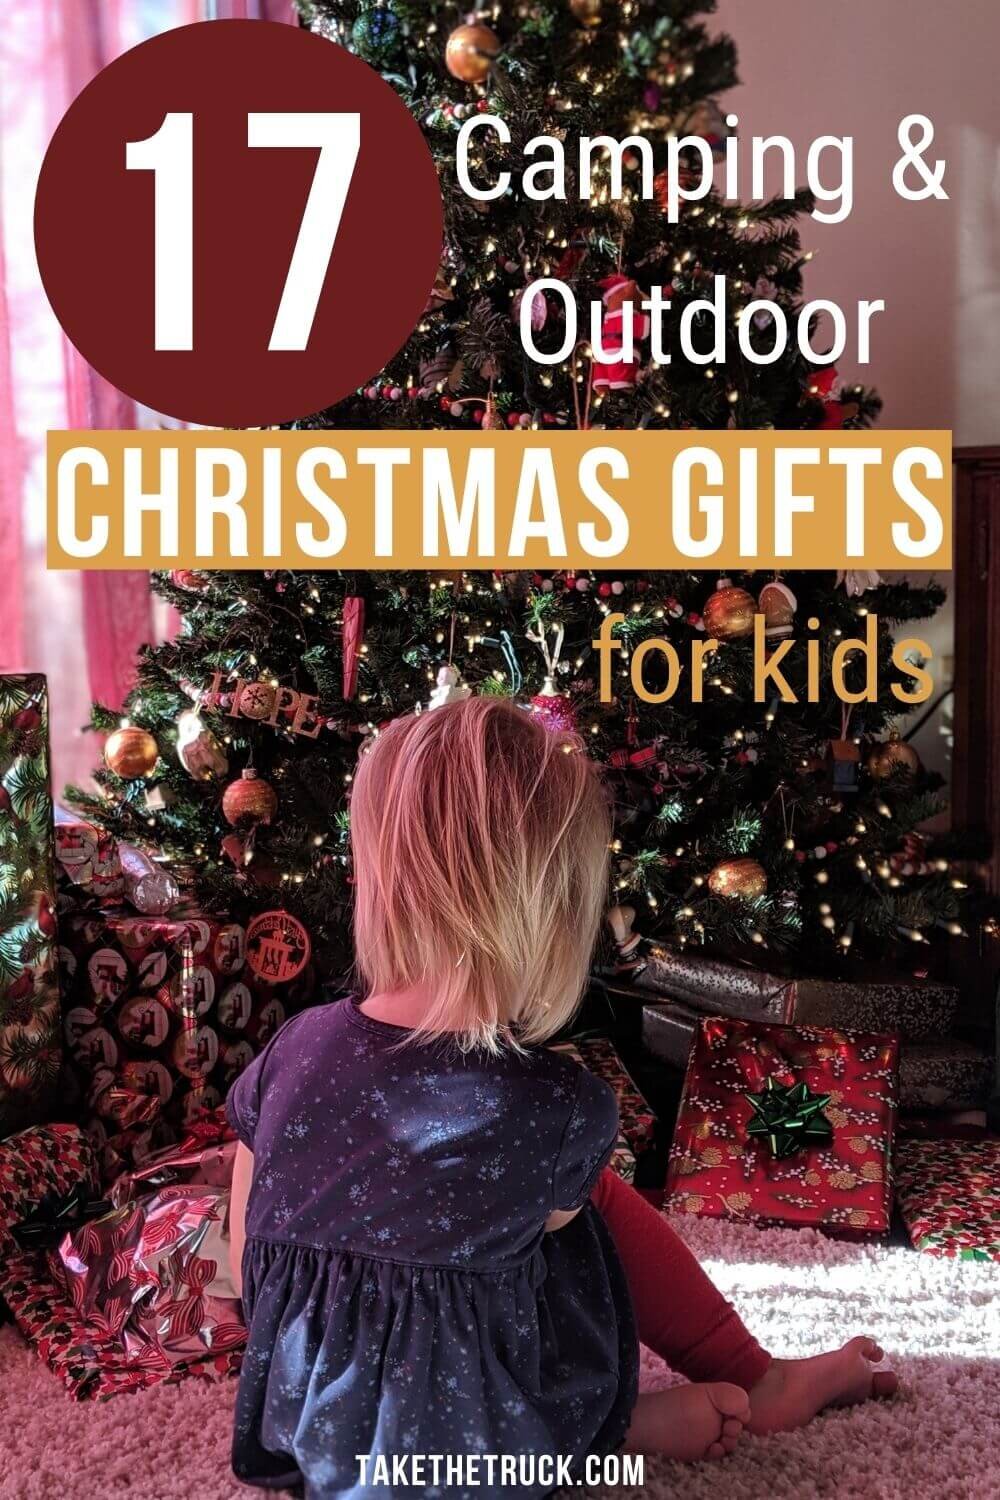 If you’re looking for camping Christmas presents for kids, outdoor gifts for kids, or even camping birthday presents for kids, read this! 17 fun gift ideas for outdoorsy children!